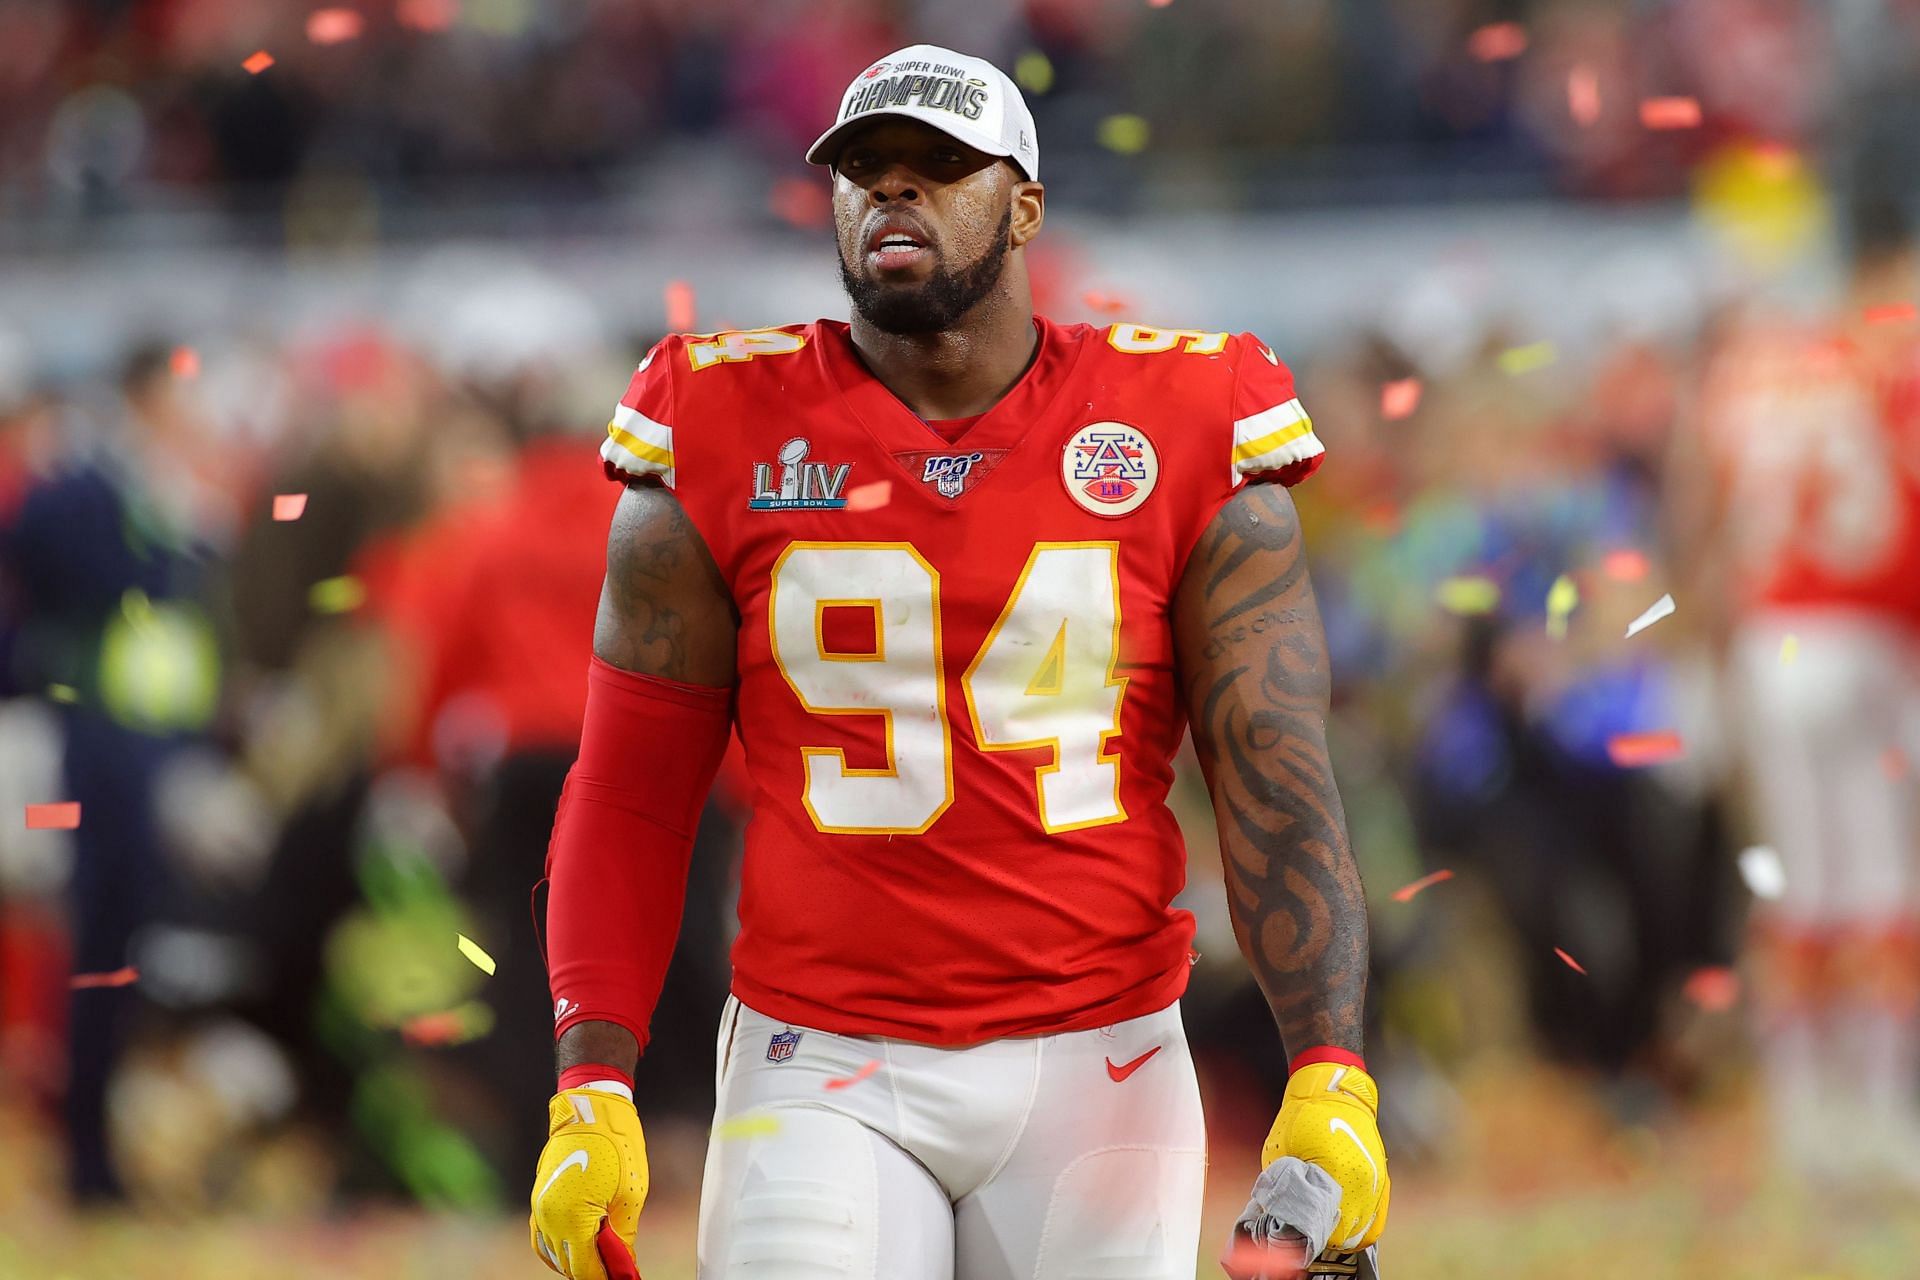 Terrell Suggs won the Super Bowl with the Kansas City Chiefs in 2020